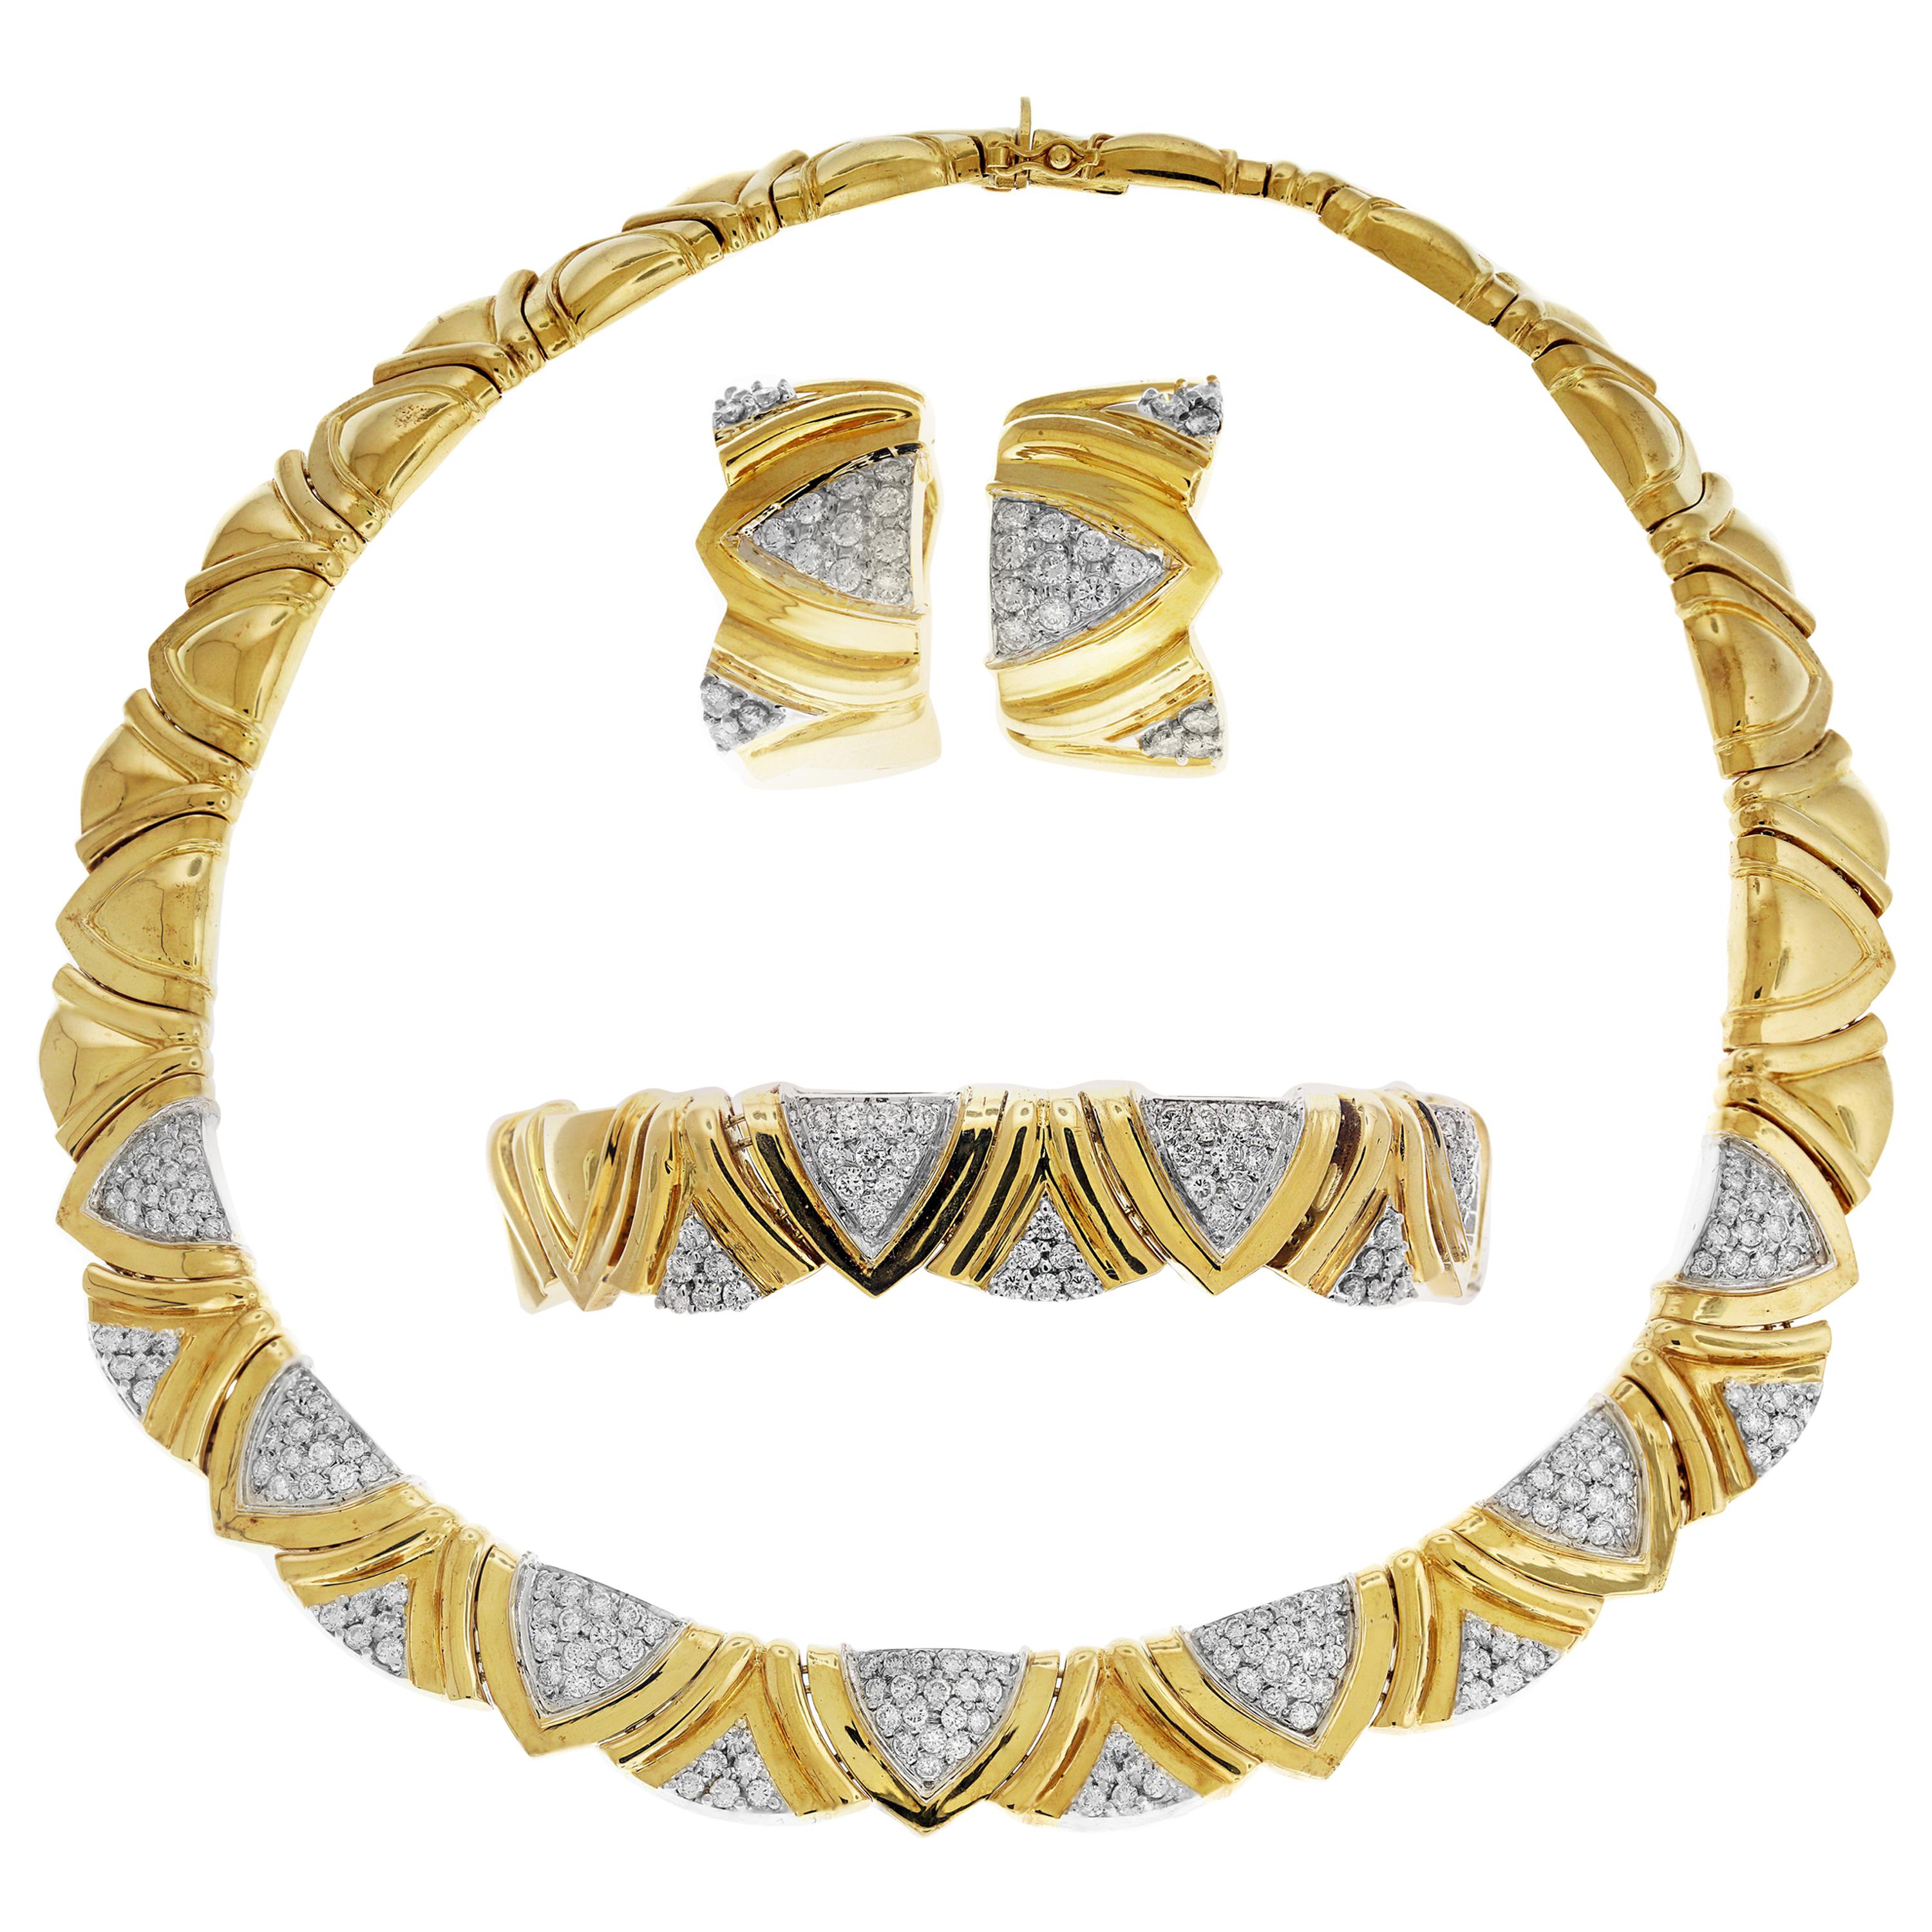 1980s Simayof Yellow Gold and Diamond Necklace Bracelet Earring Set